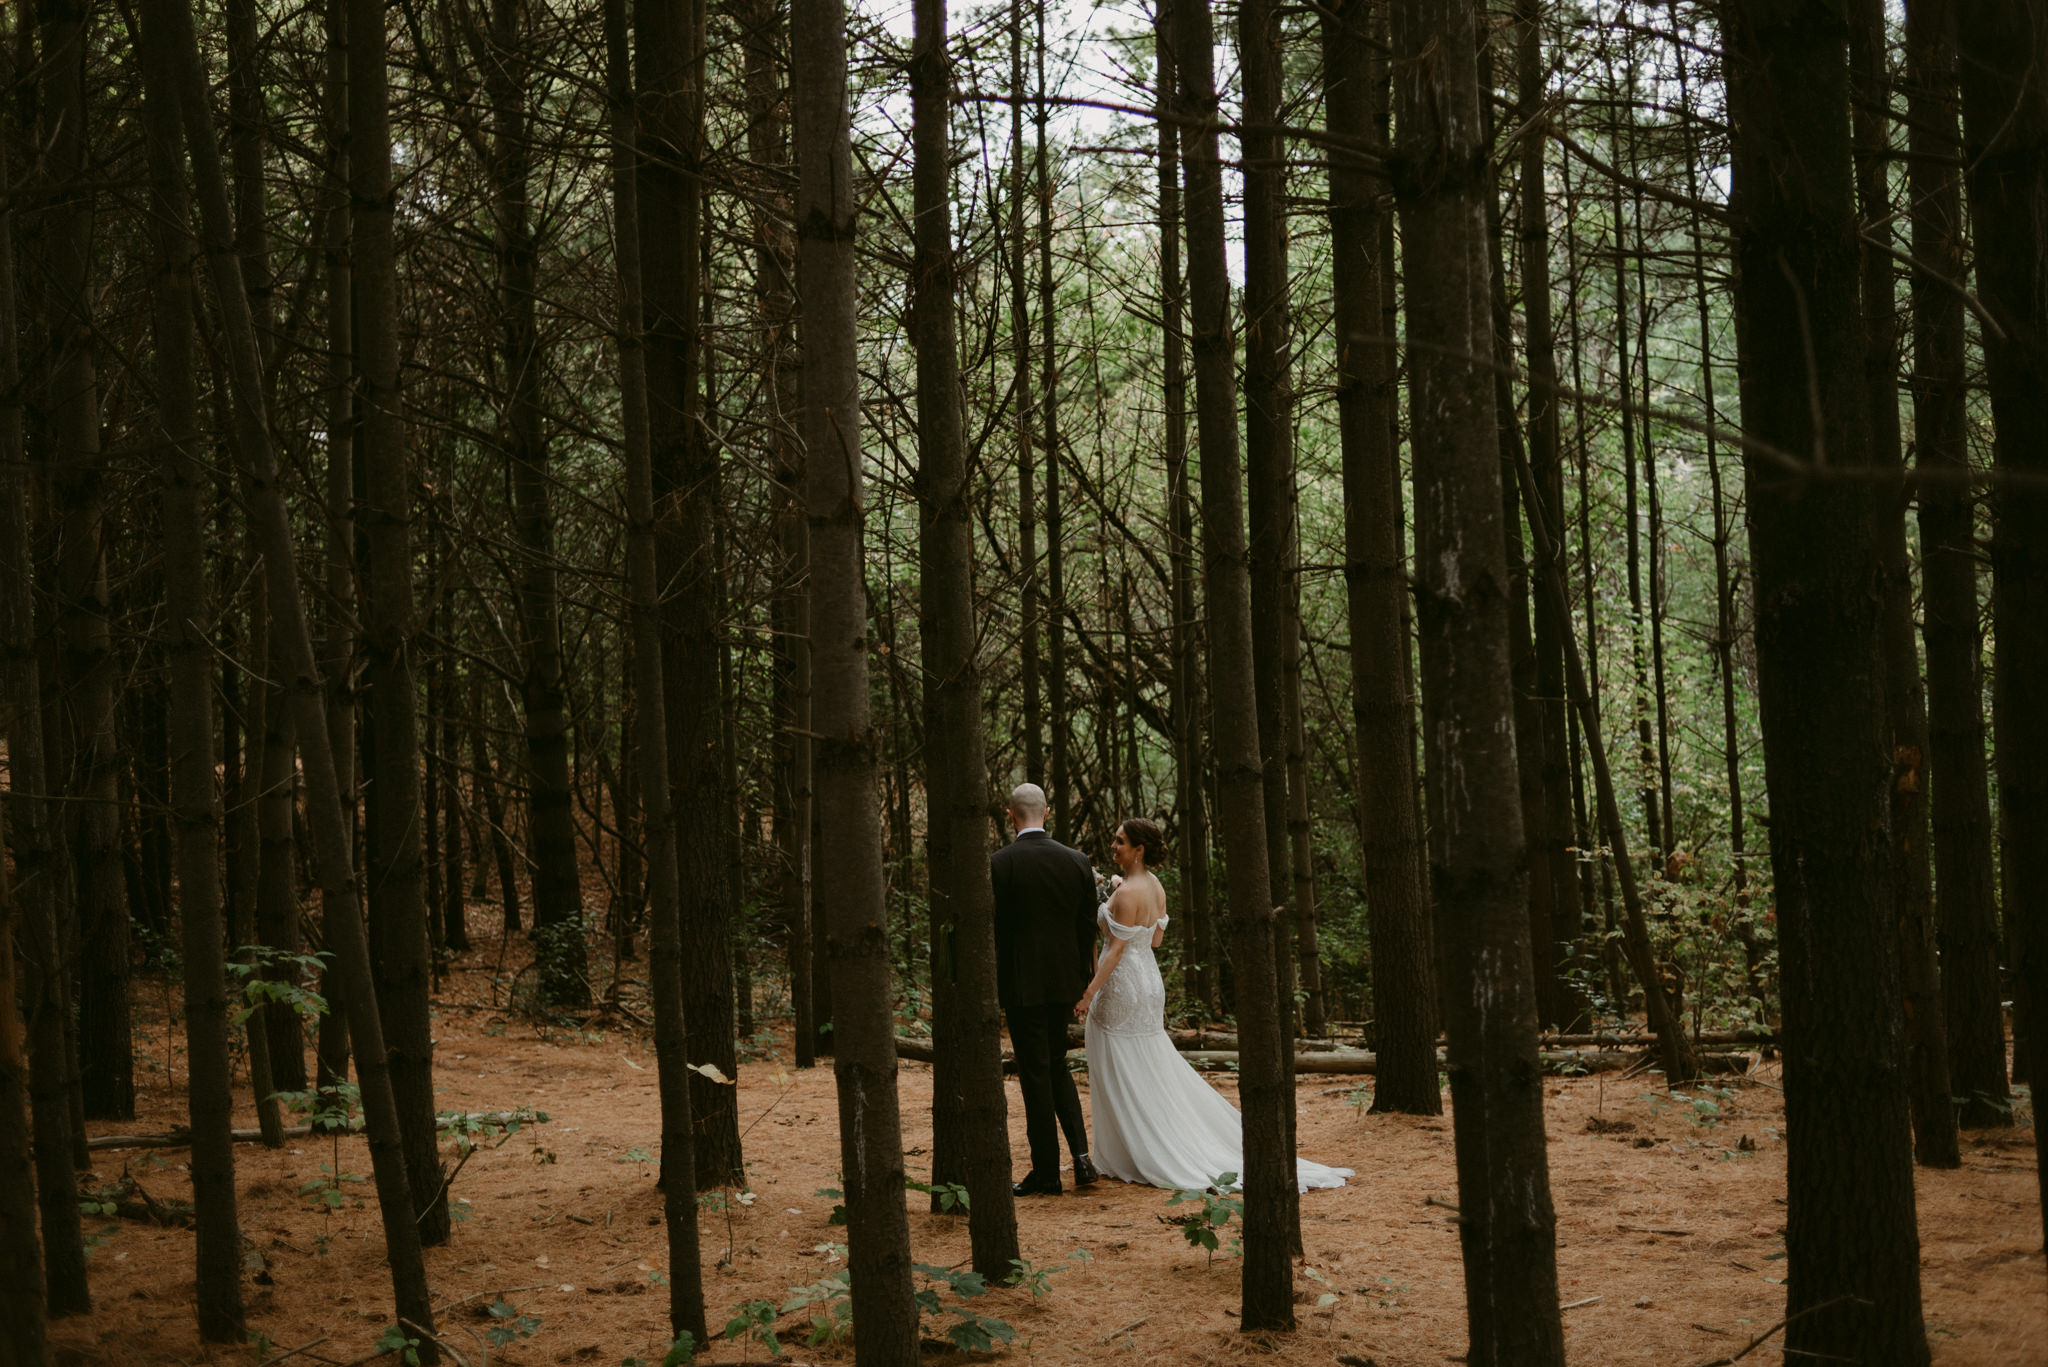 Bride and groom holding hands and walking in forest